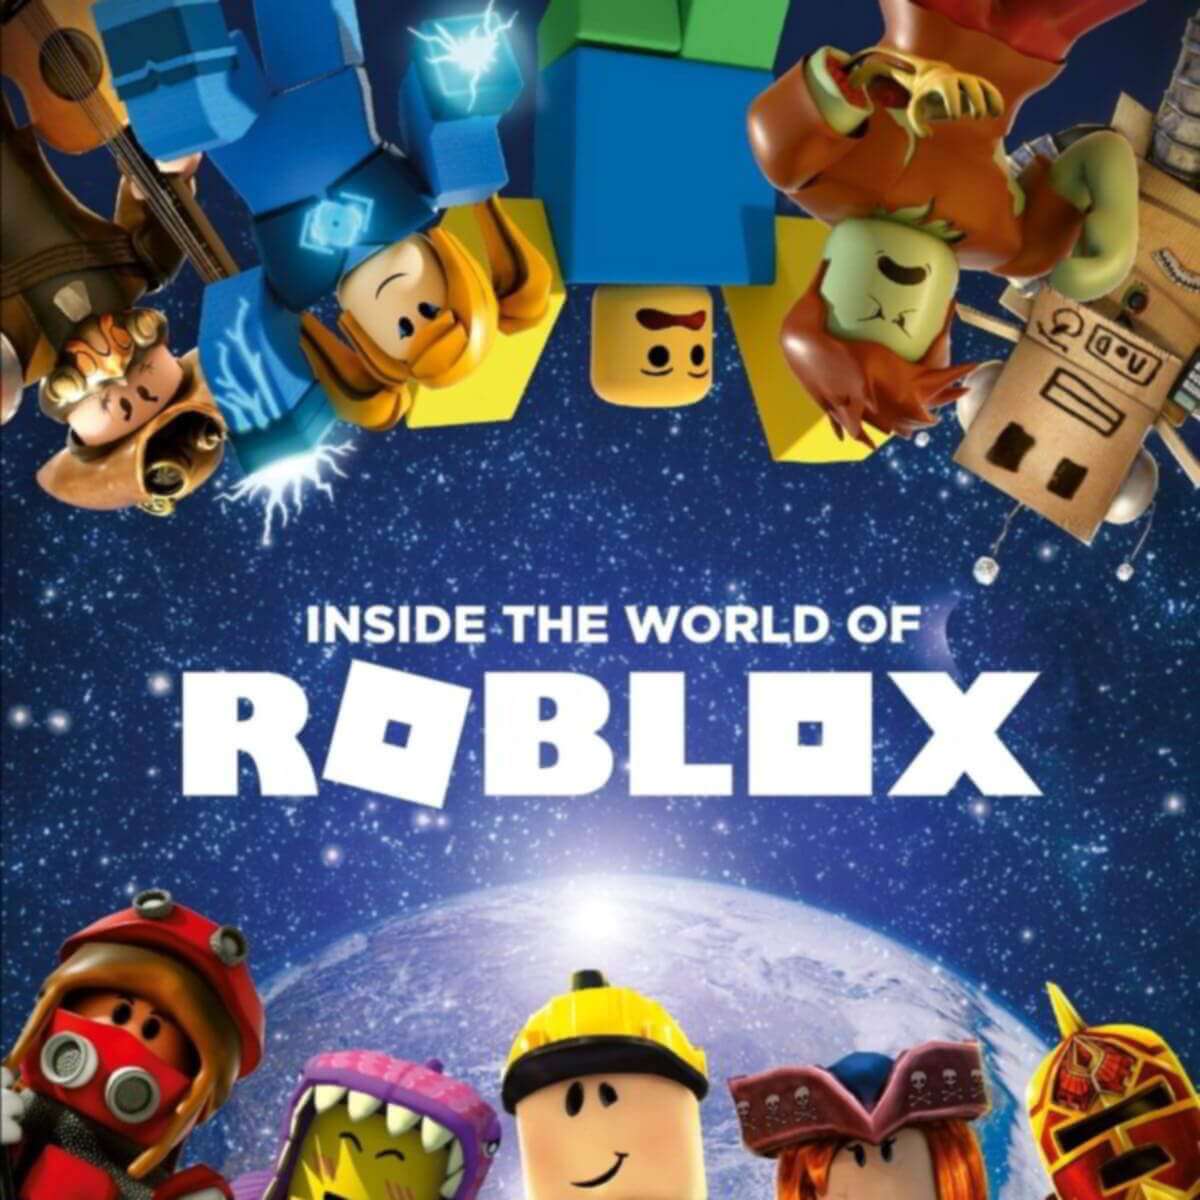 Roblox Game On Xbox 1